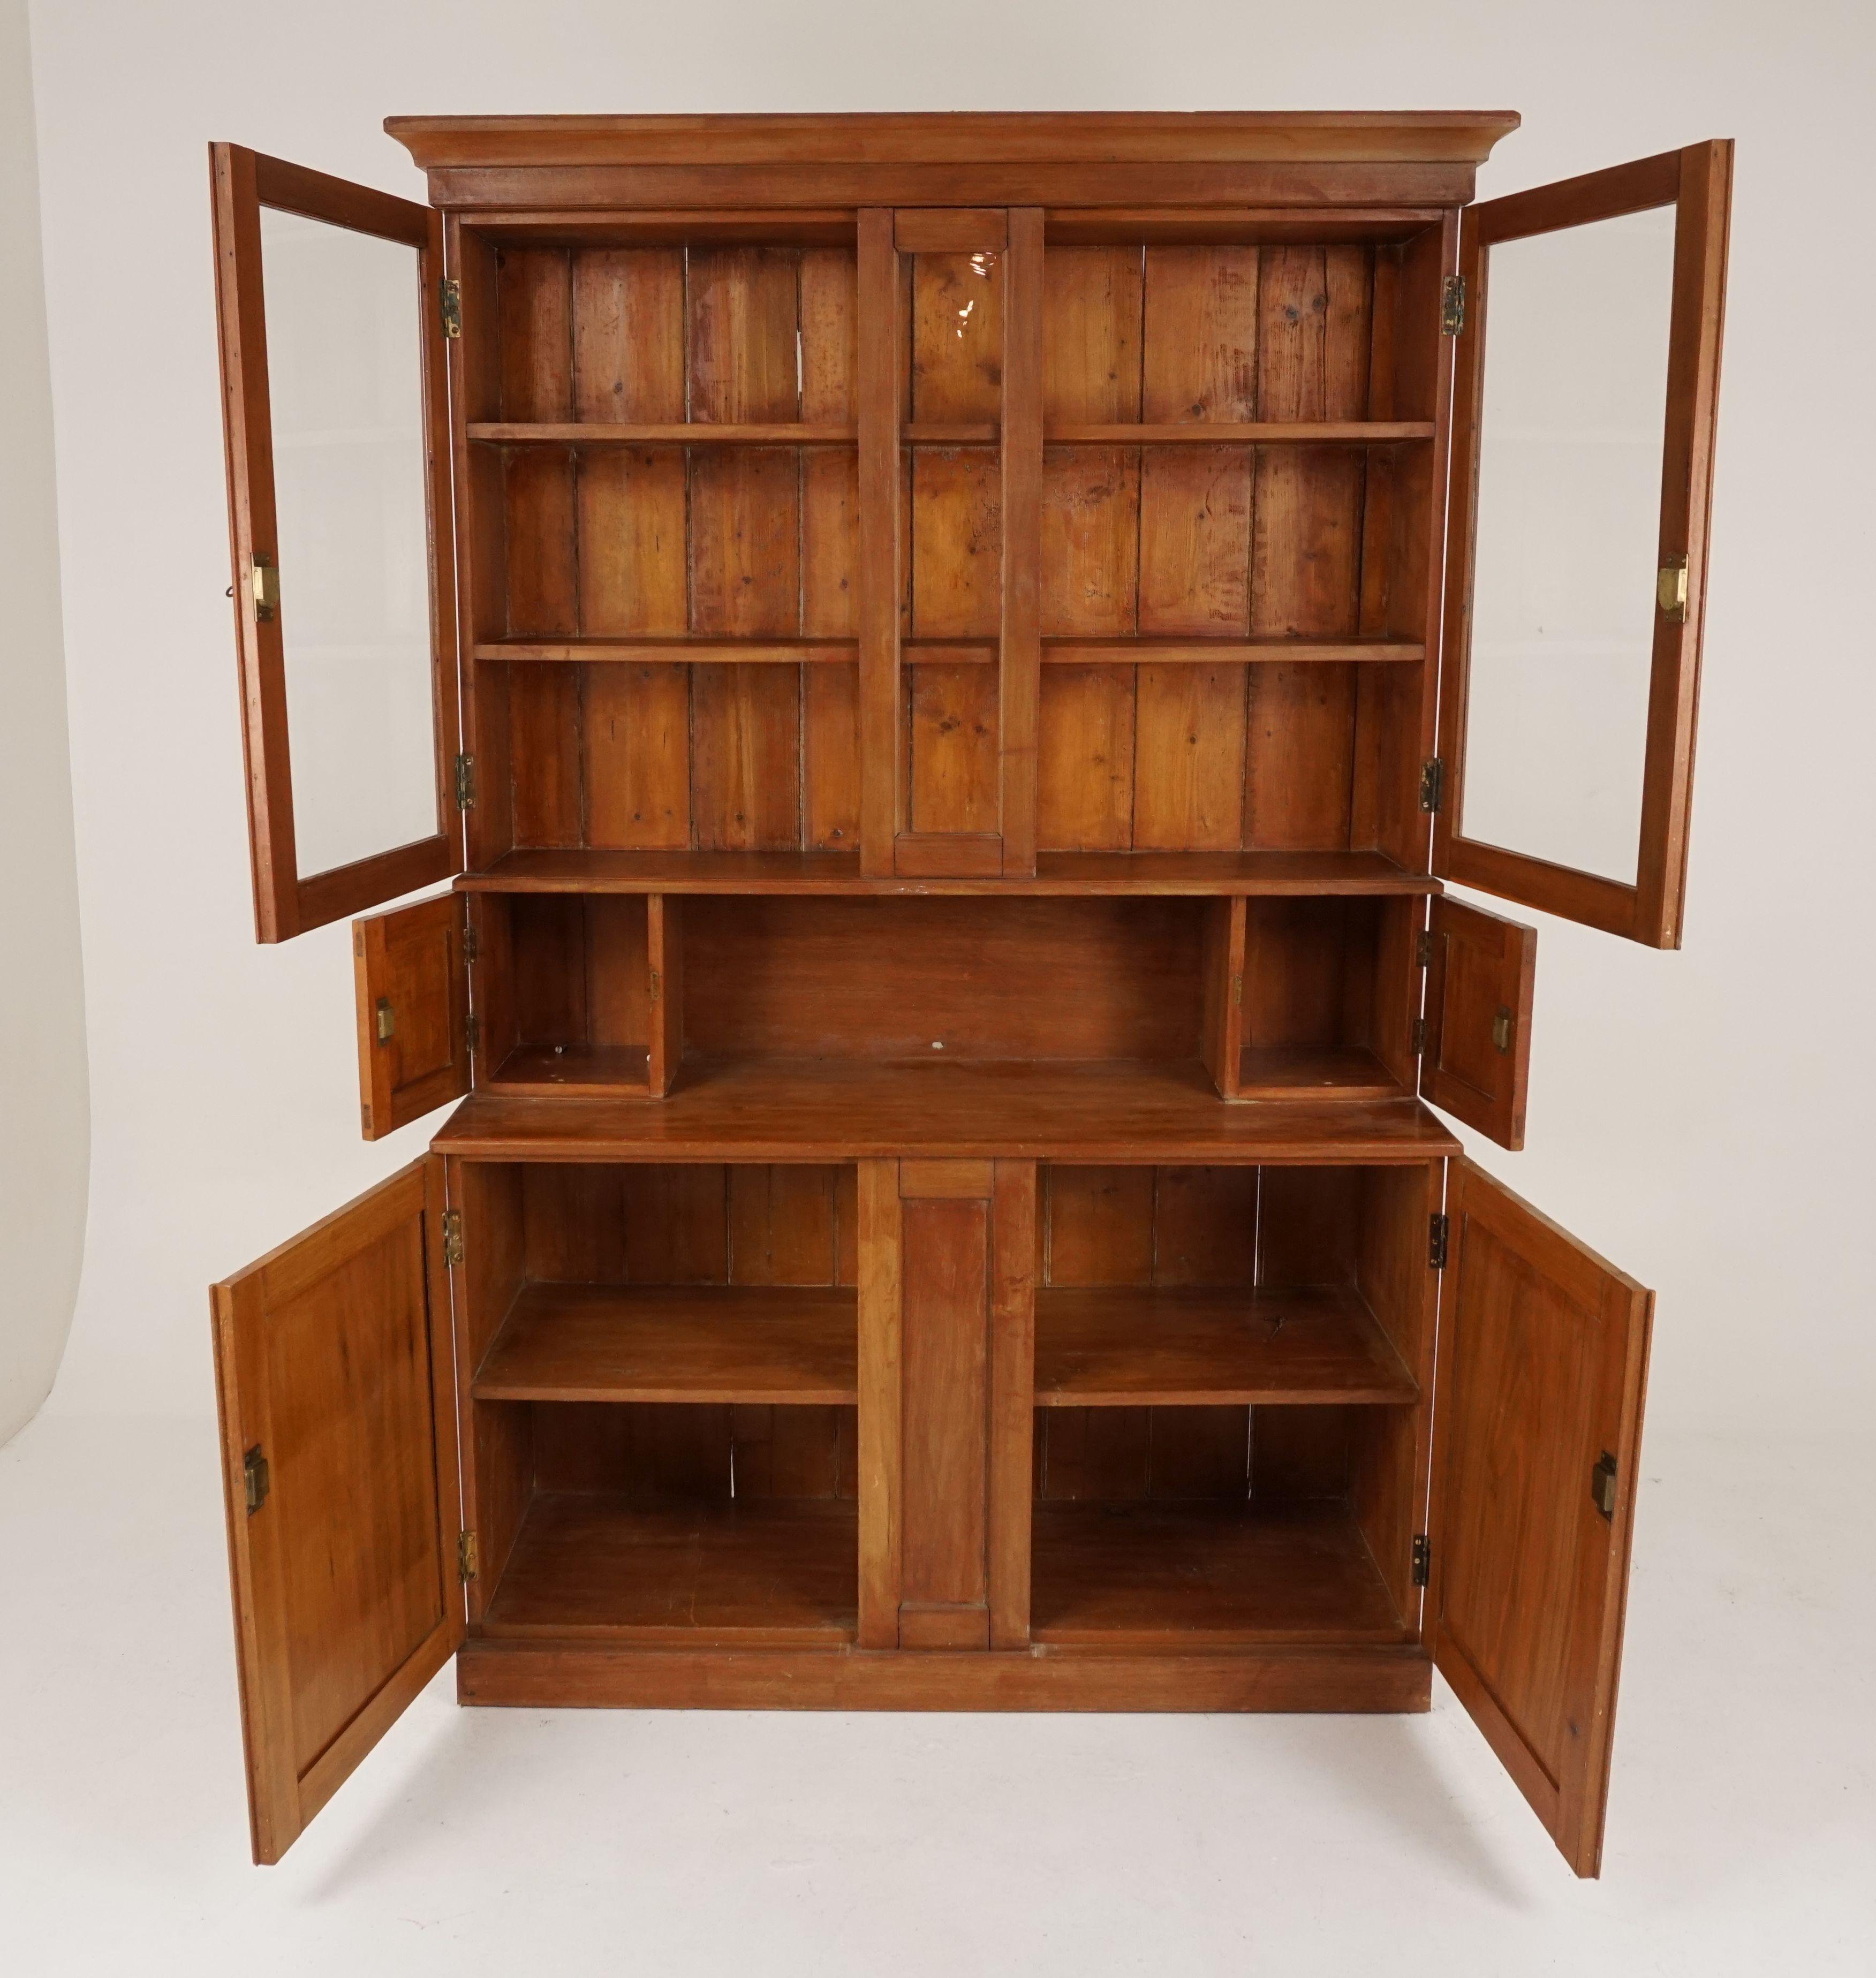 Large antique farmhouse kitchen dresser, pine sideboard, buffet, Scotland 1890, B2155

Scotland 1890
Solid pine
Large moulded cornice
Boarded pine
Paneled back
Pair of fixed interior shelves
Underneath a pair of cupboard with storage